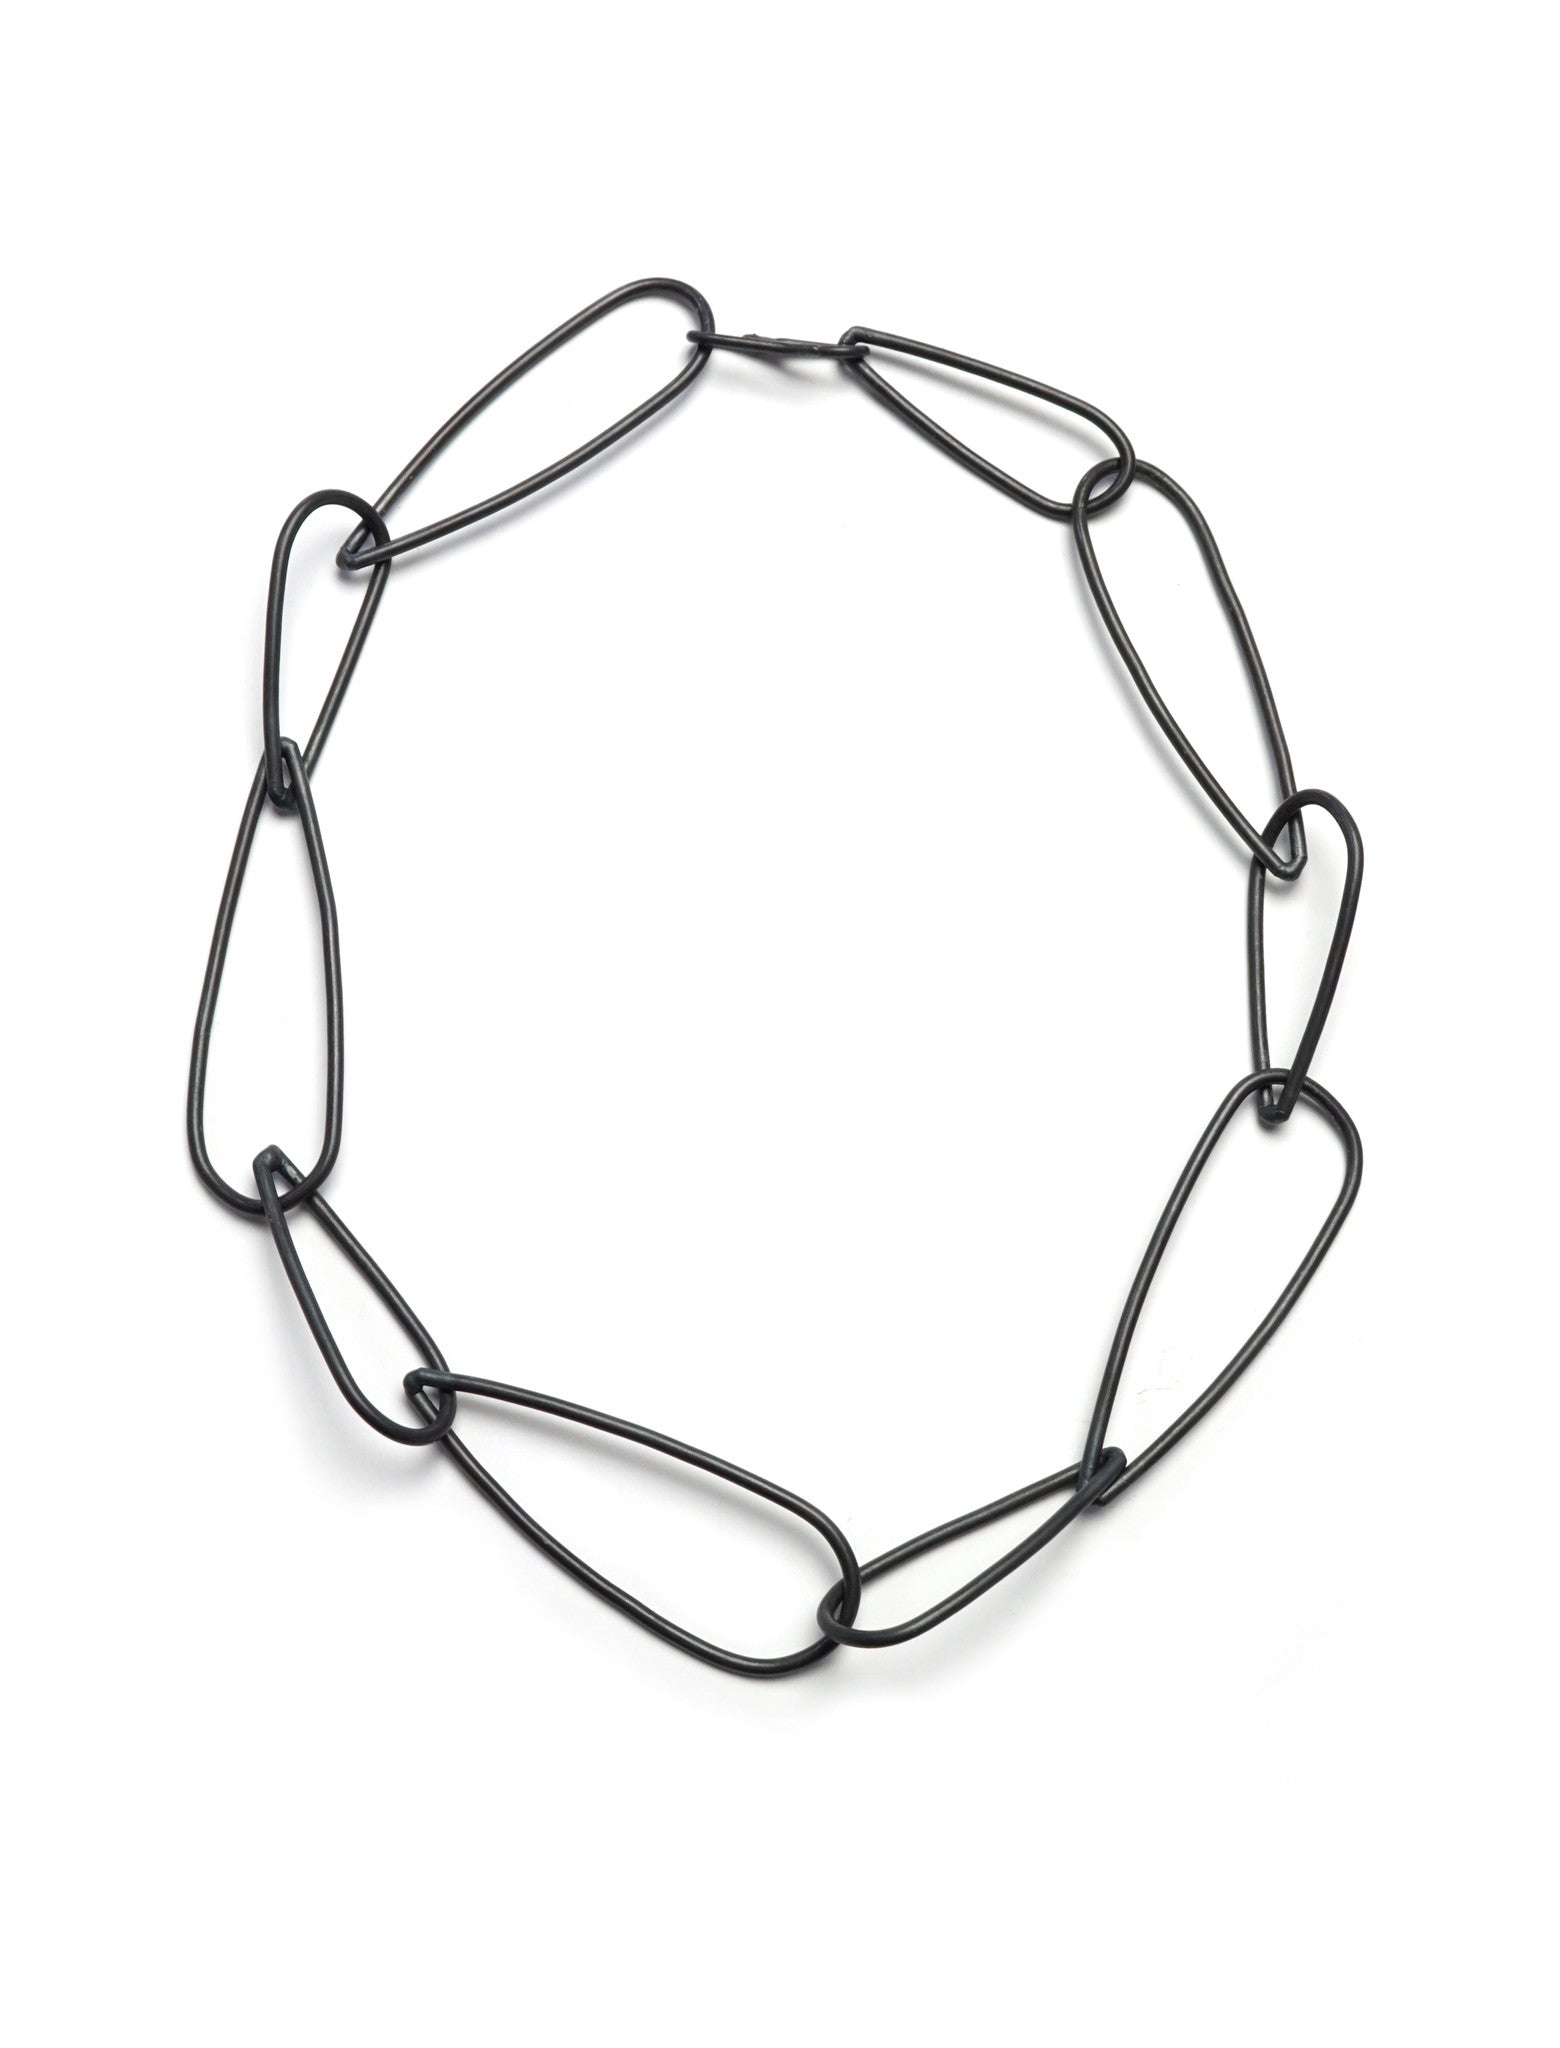 Modular Necklace No. 1 in steel